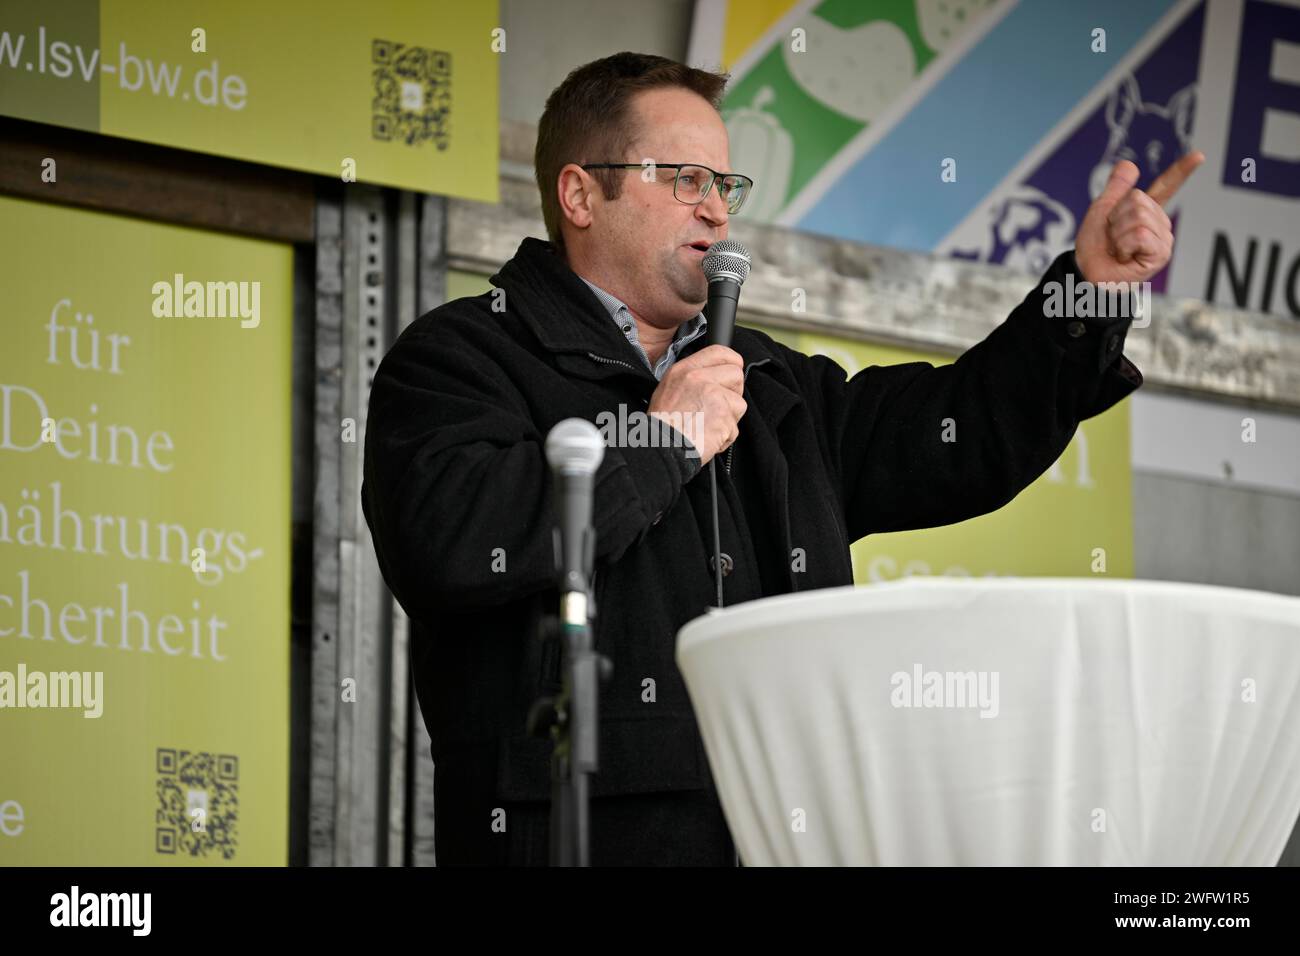 Rally with Juergen Maurer, Chairman of the Schwaebisch Hall-Hohenlohe-Rems LBV farmers' association, microphone, gesture, farmers' protest Stock Photo